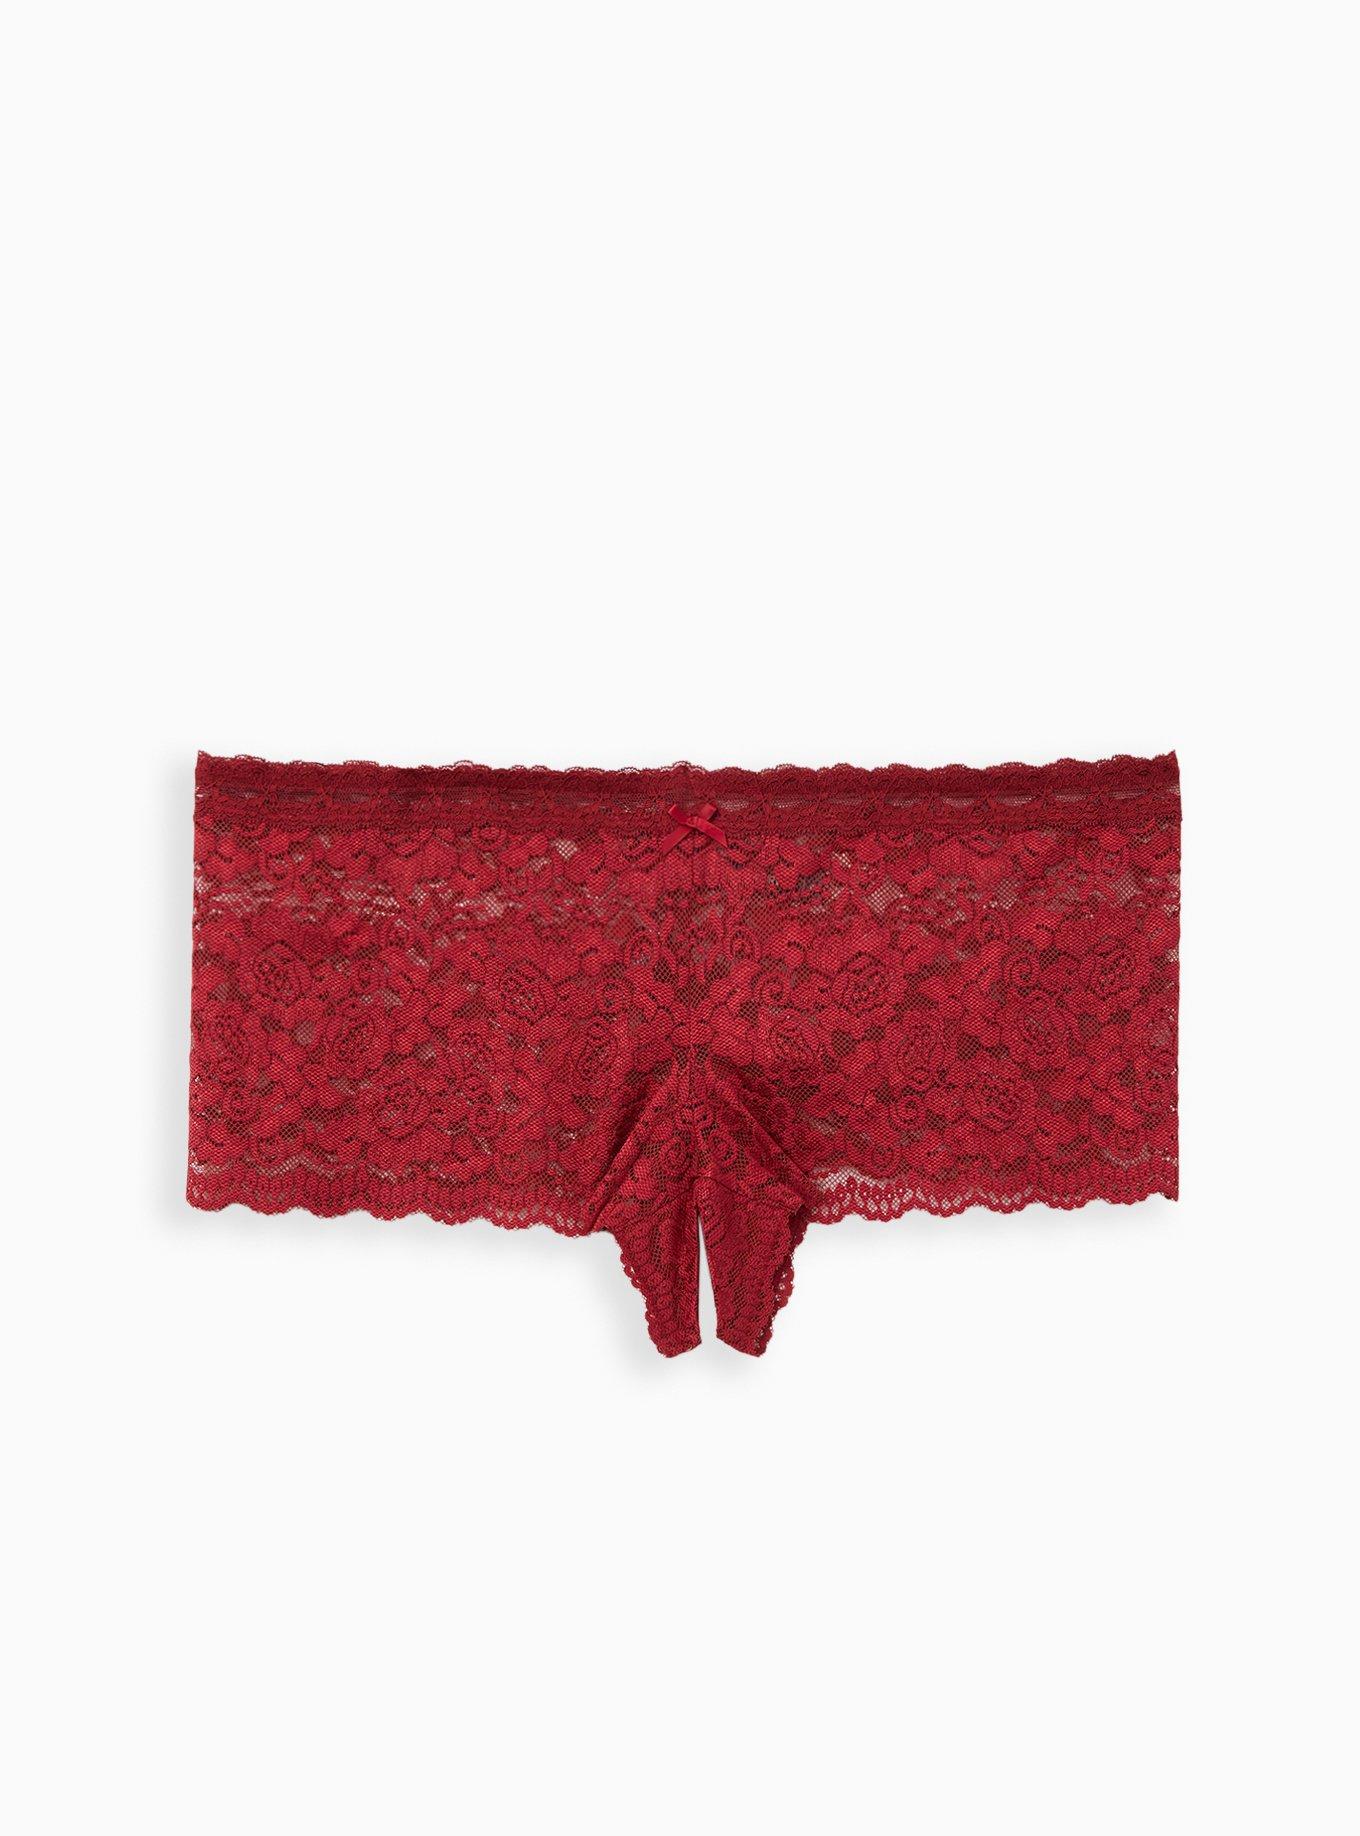 TORRID Lace Cheeky Panty With Open Gusset